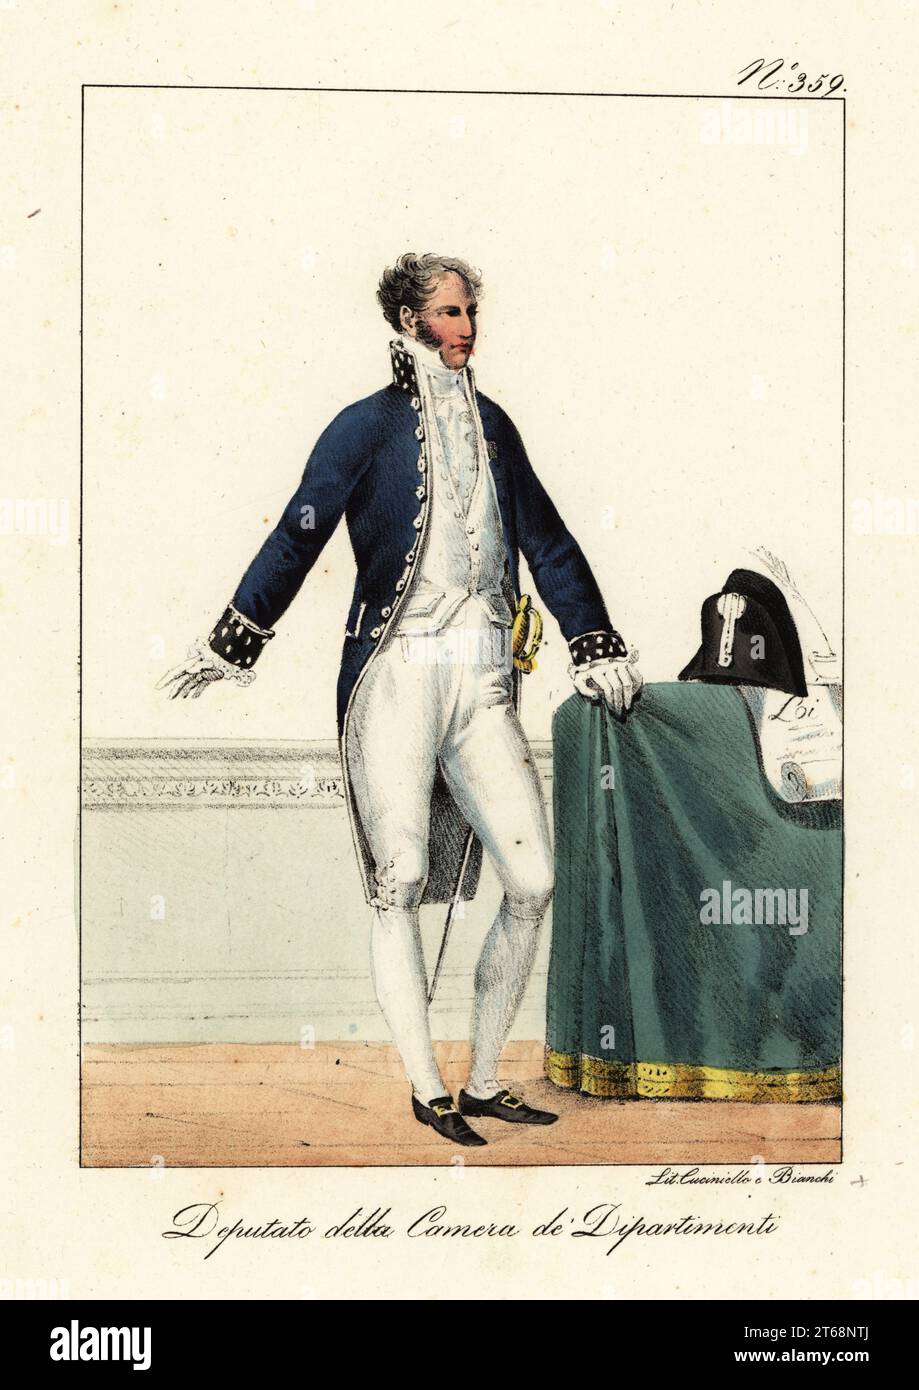 Costume of a member of the Chamber of Deputies of Departments, Bourbon Restoration, 1815. In blue coat with silver collar and cuffs, court sword, bicorne. Depute a la Chambre des députés des départements. Handcoloured lithograph by Lorenzo Bianchi and Domenico Cuciniello after Hippolyte Lecomte from Costumi civili e militari della monarchia francese dal 1200 al 1820, Naples, 1825. Italian edition of Lecomtes Civilian and military costumes of the French monarchy from 1200 to 1820. Stock Photo